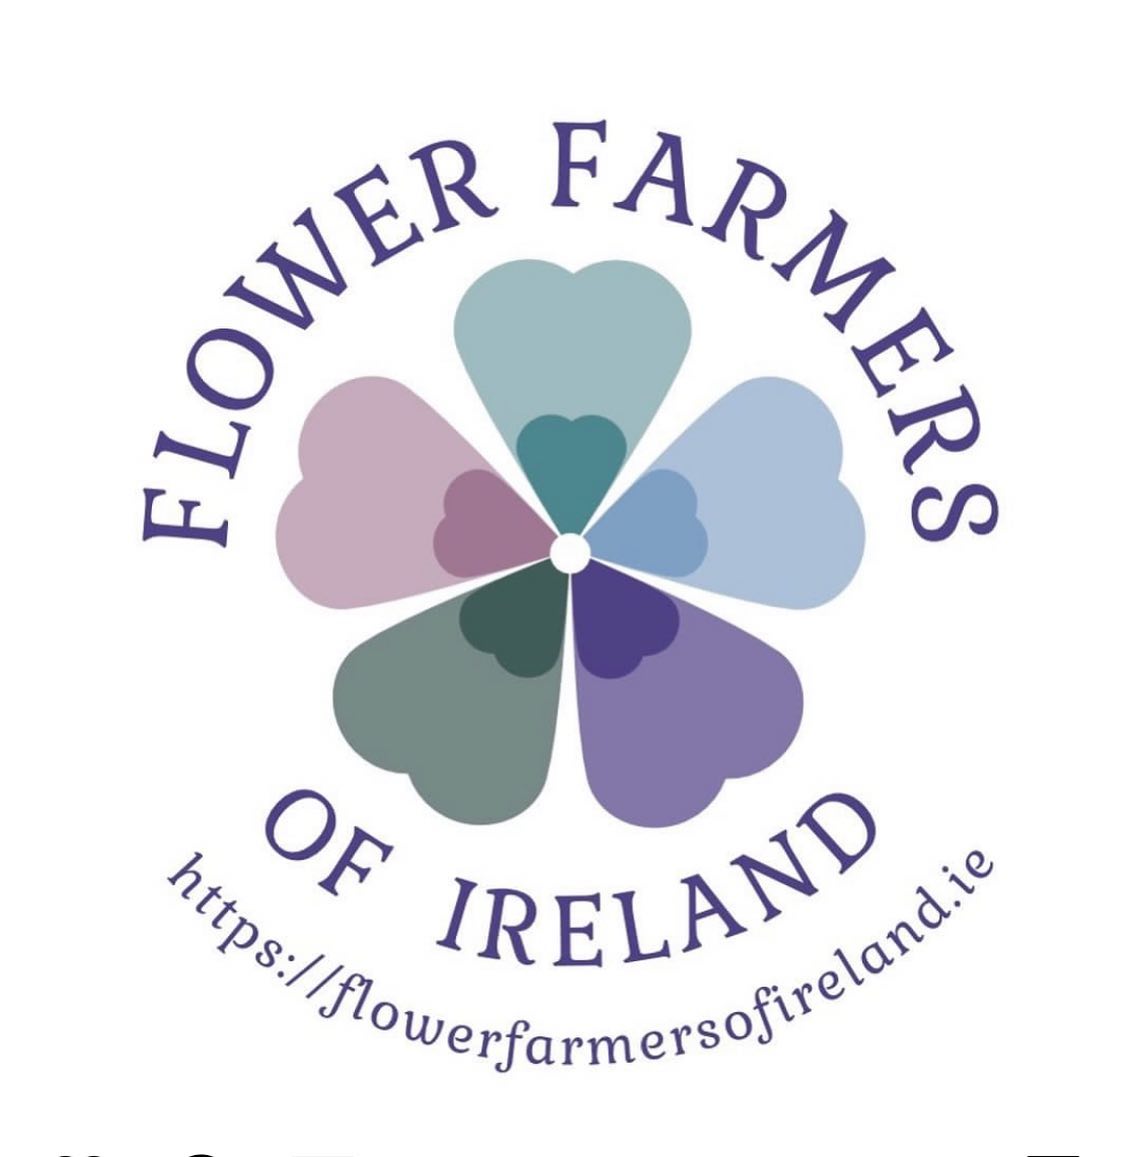 Beyond excited to be teaching 2 workshops in Ireland 26/27 September  Thank you @flowerfarmersireland  for inviting me.  I can’t wait! ☘️